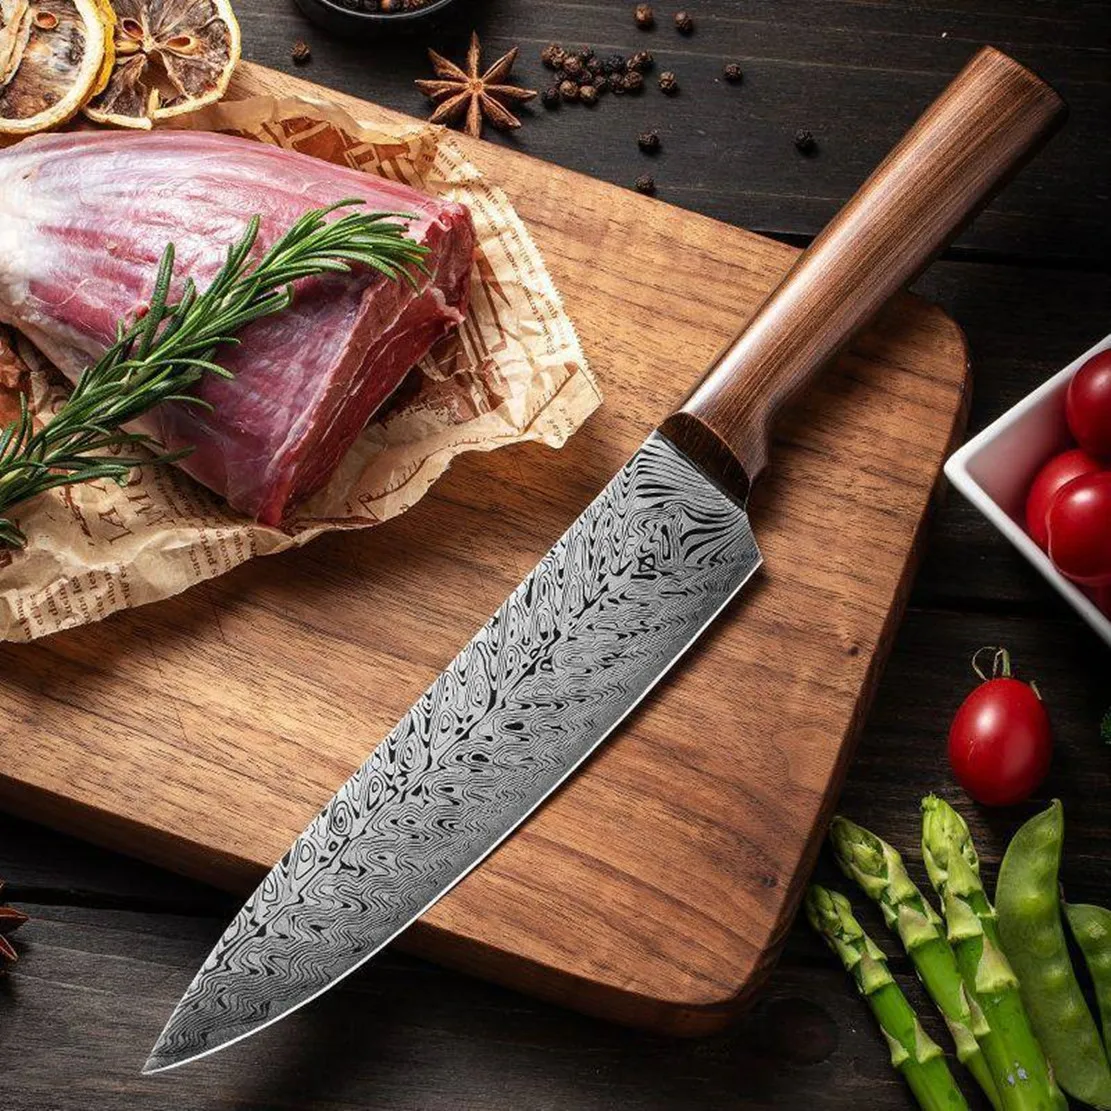 

New Damascus Chef Knife Stainless Steel kitchen Knife Japanese Santoku Knives Sharp Cleaver Slicing Steak knife Cooking Tool